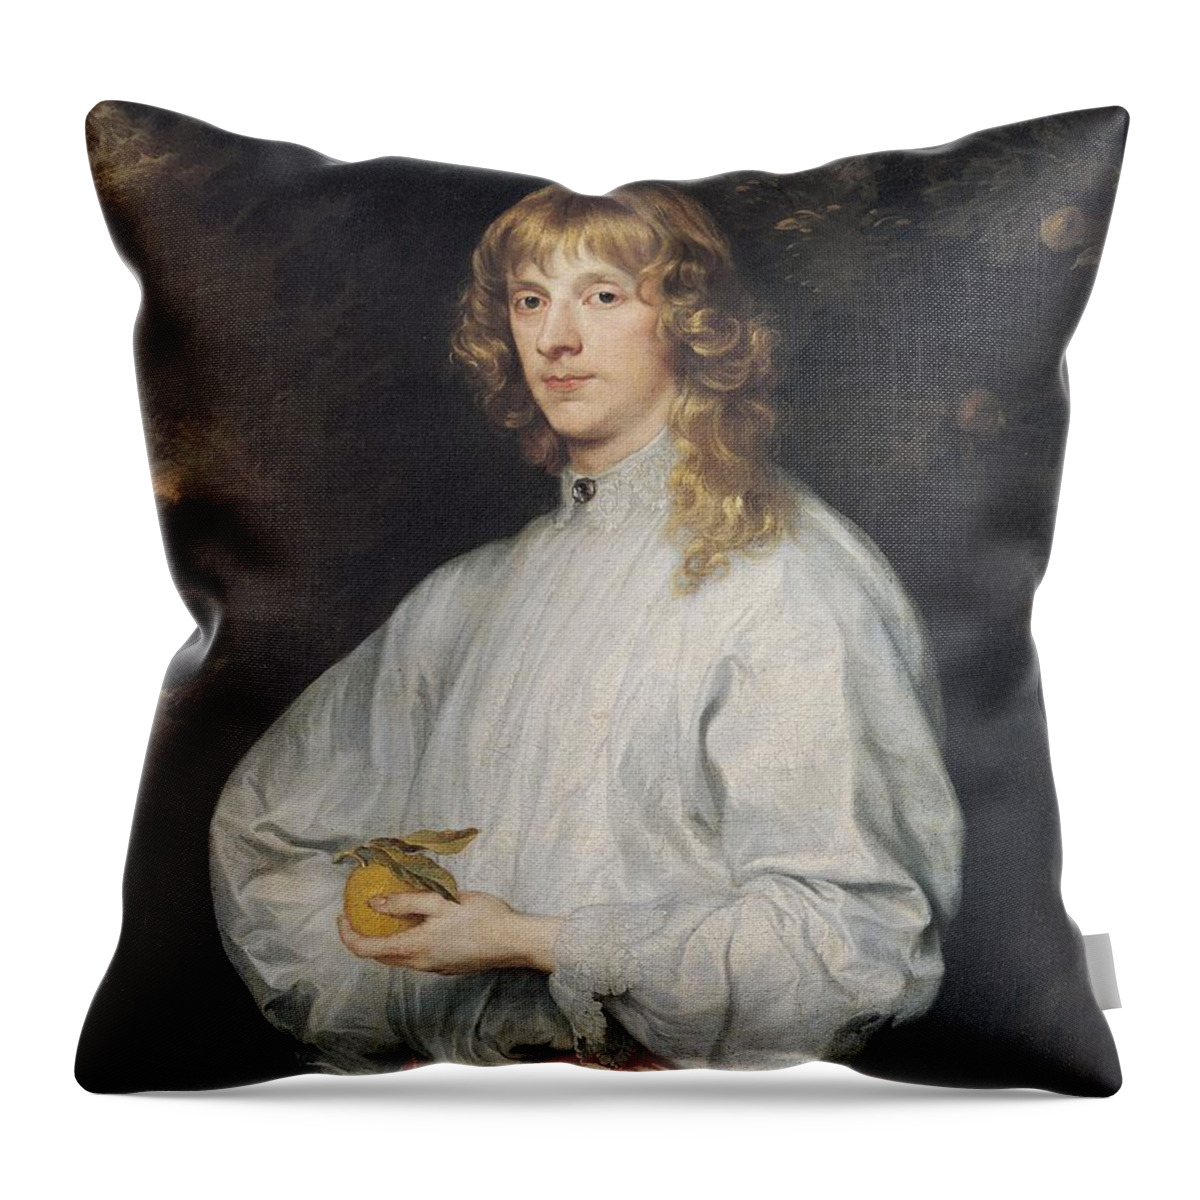 Aristocracy Throw Pillow featuring the photograph James Stuart 1612-55 Duke Of Richmond And Lennox, 1632-41 Oil On Canvas by Anthony van Dyck